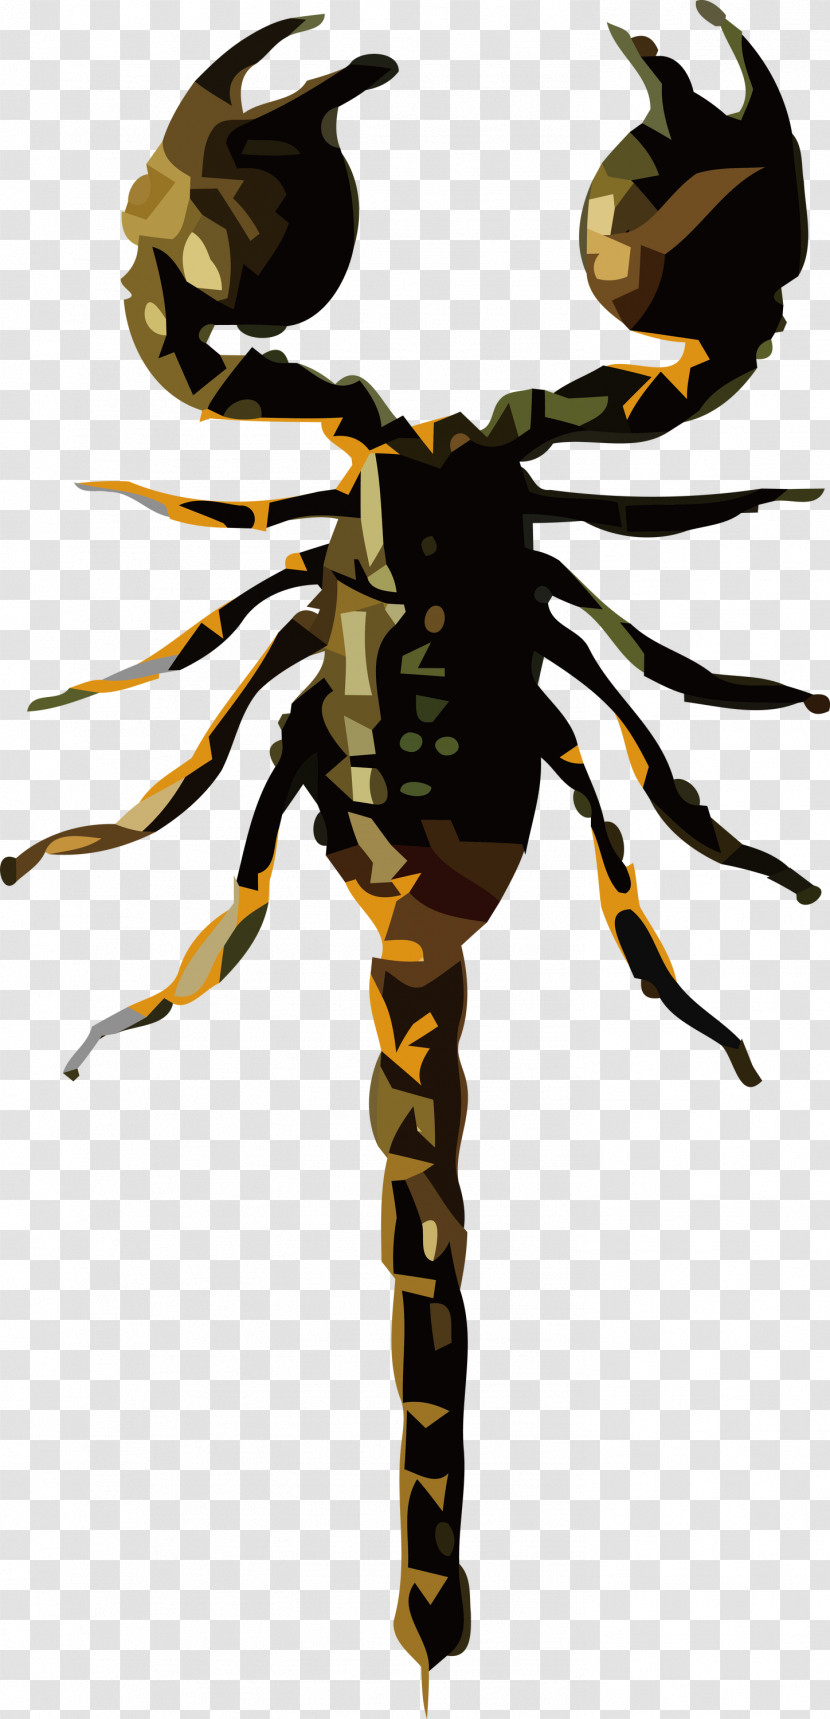 Insect Pollinator Bees Pest Transparent PNG